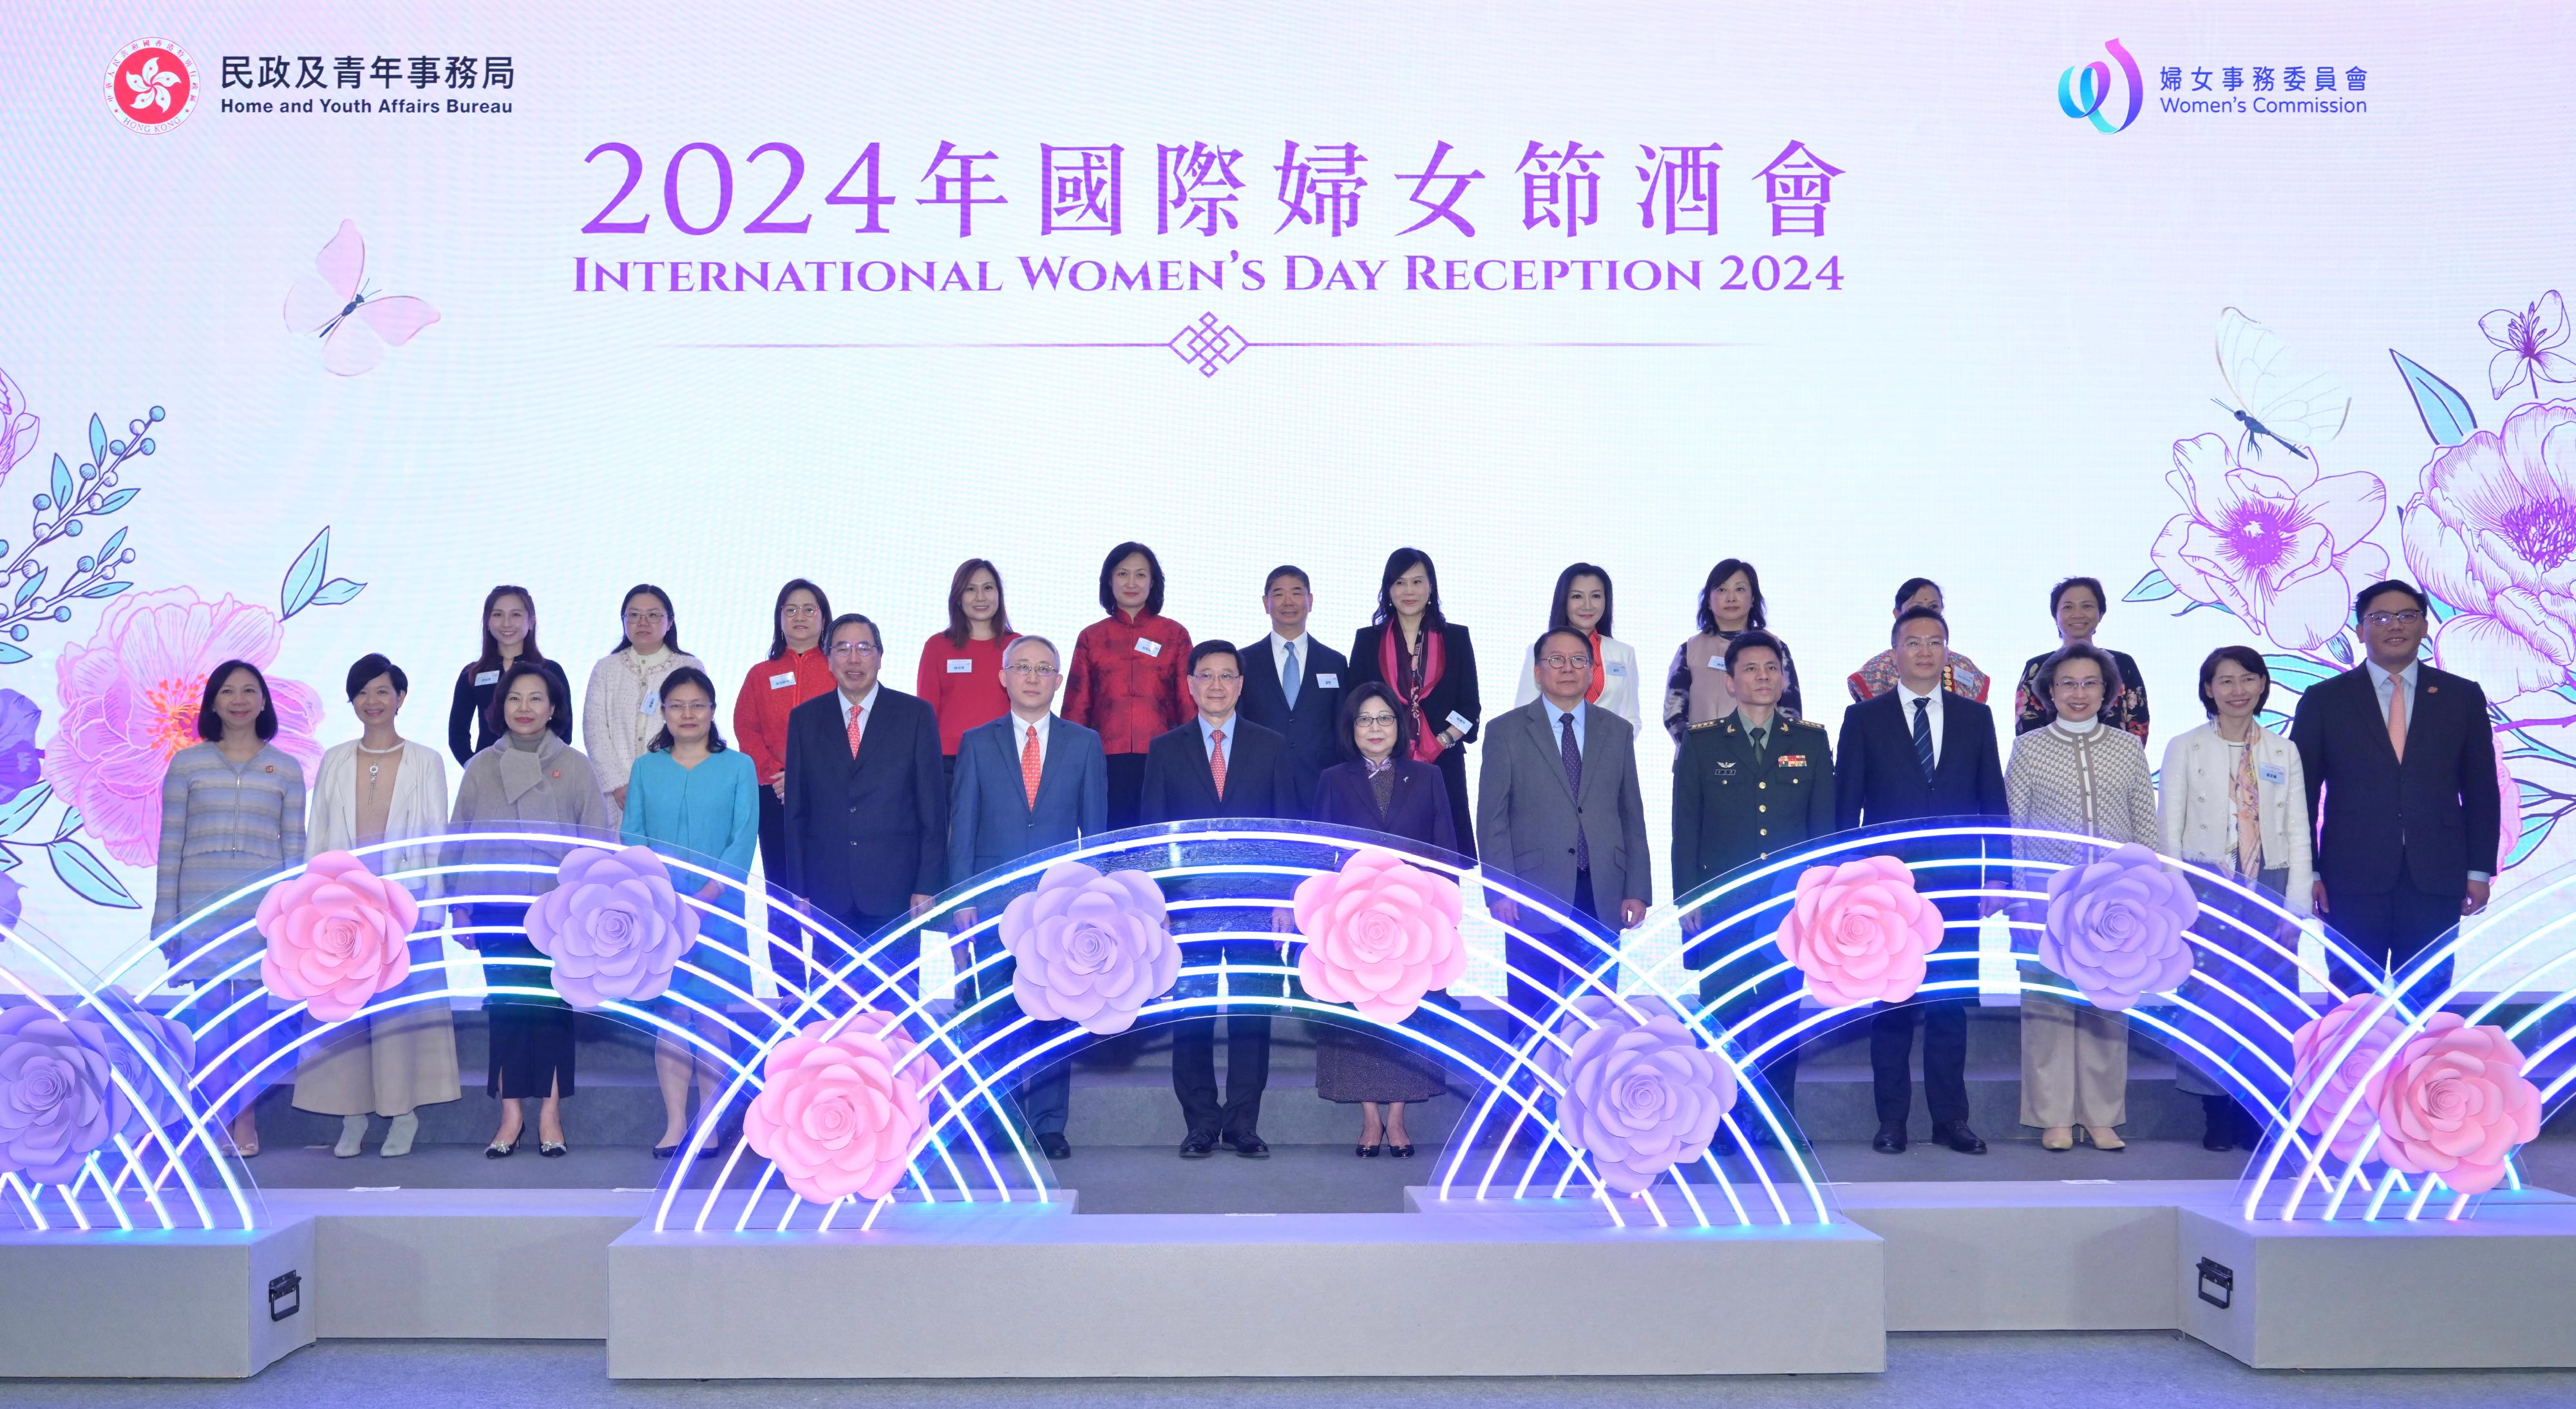 The Chief Executive, Mr John Lee, attended the International Women's Day Reception 2024 today (March 8). Photo shows (first row, from left) the Permanent Secretary for Home and Youth Affairs, Ms Shirley Lam; the Secretary for Housing, Ms Winnie Ho; the Secretary for Home and Youth Affairs, Miss Alice Mak; Deputy Director-General of the Coordination Department of the Liaison Office of the Central People's Government in the Hong Kong Special Administrative Region (HKSAR) Ms Li Ling; the President of the Legislative Council, Mr Andrew Leung; the Acting Commissioner of the Office of the Commissioner of the Ministry of Foreign Affairs of the People's Republic of China in the HKSAR, Mr Li Yongsheng; Mr Lee and his wife; the Chief Secretary for Administration, Mr Chan Kwok-ki; Deputy Director of the Political Department of the Chinese People's Liberation Army Hong Kong Garrison Senior Colonel Qi Xiaochun; Deputy Director of the liaison office of the Office for Safeguarding National Security of the Central People's Government in the HKSAR Mr Xie Zhixiang; the Secretary for the Civil Service, Mrs Ingrid Yeung; the Director of the Chief Executive's Office, Ms Carol Yip; and the Under Secretary for Home and Youth Affairs, Mr Clarence Leung, with members of the Women's Commission at the reception.